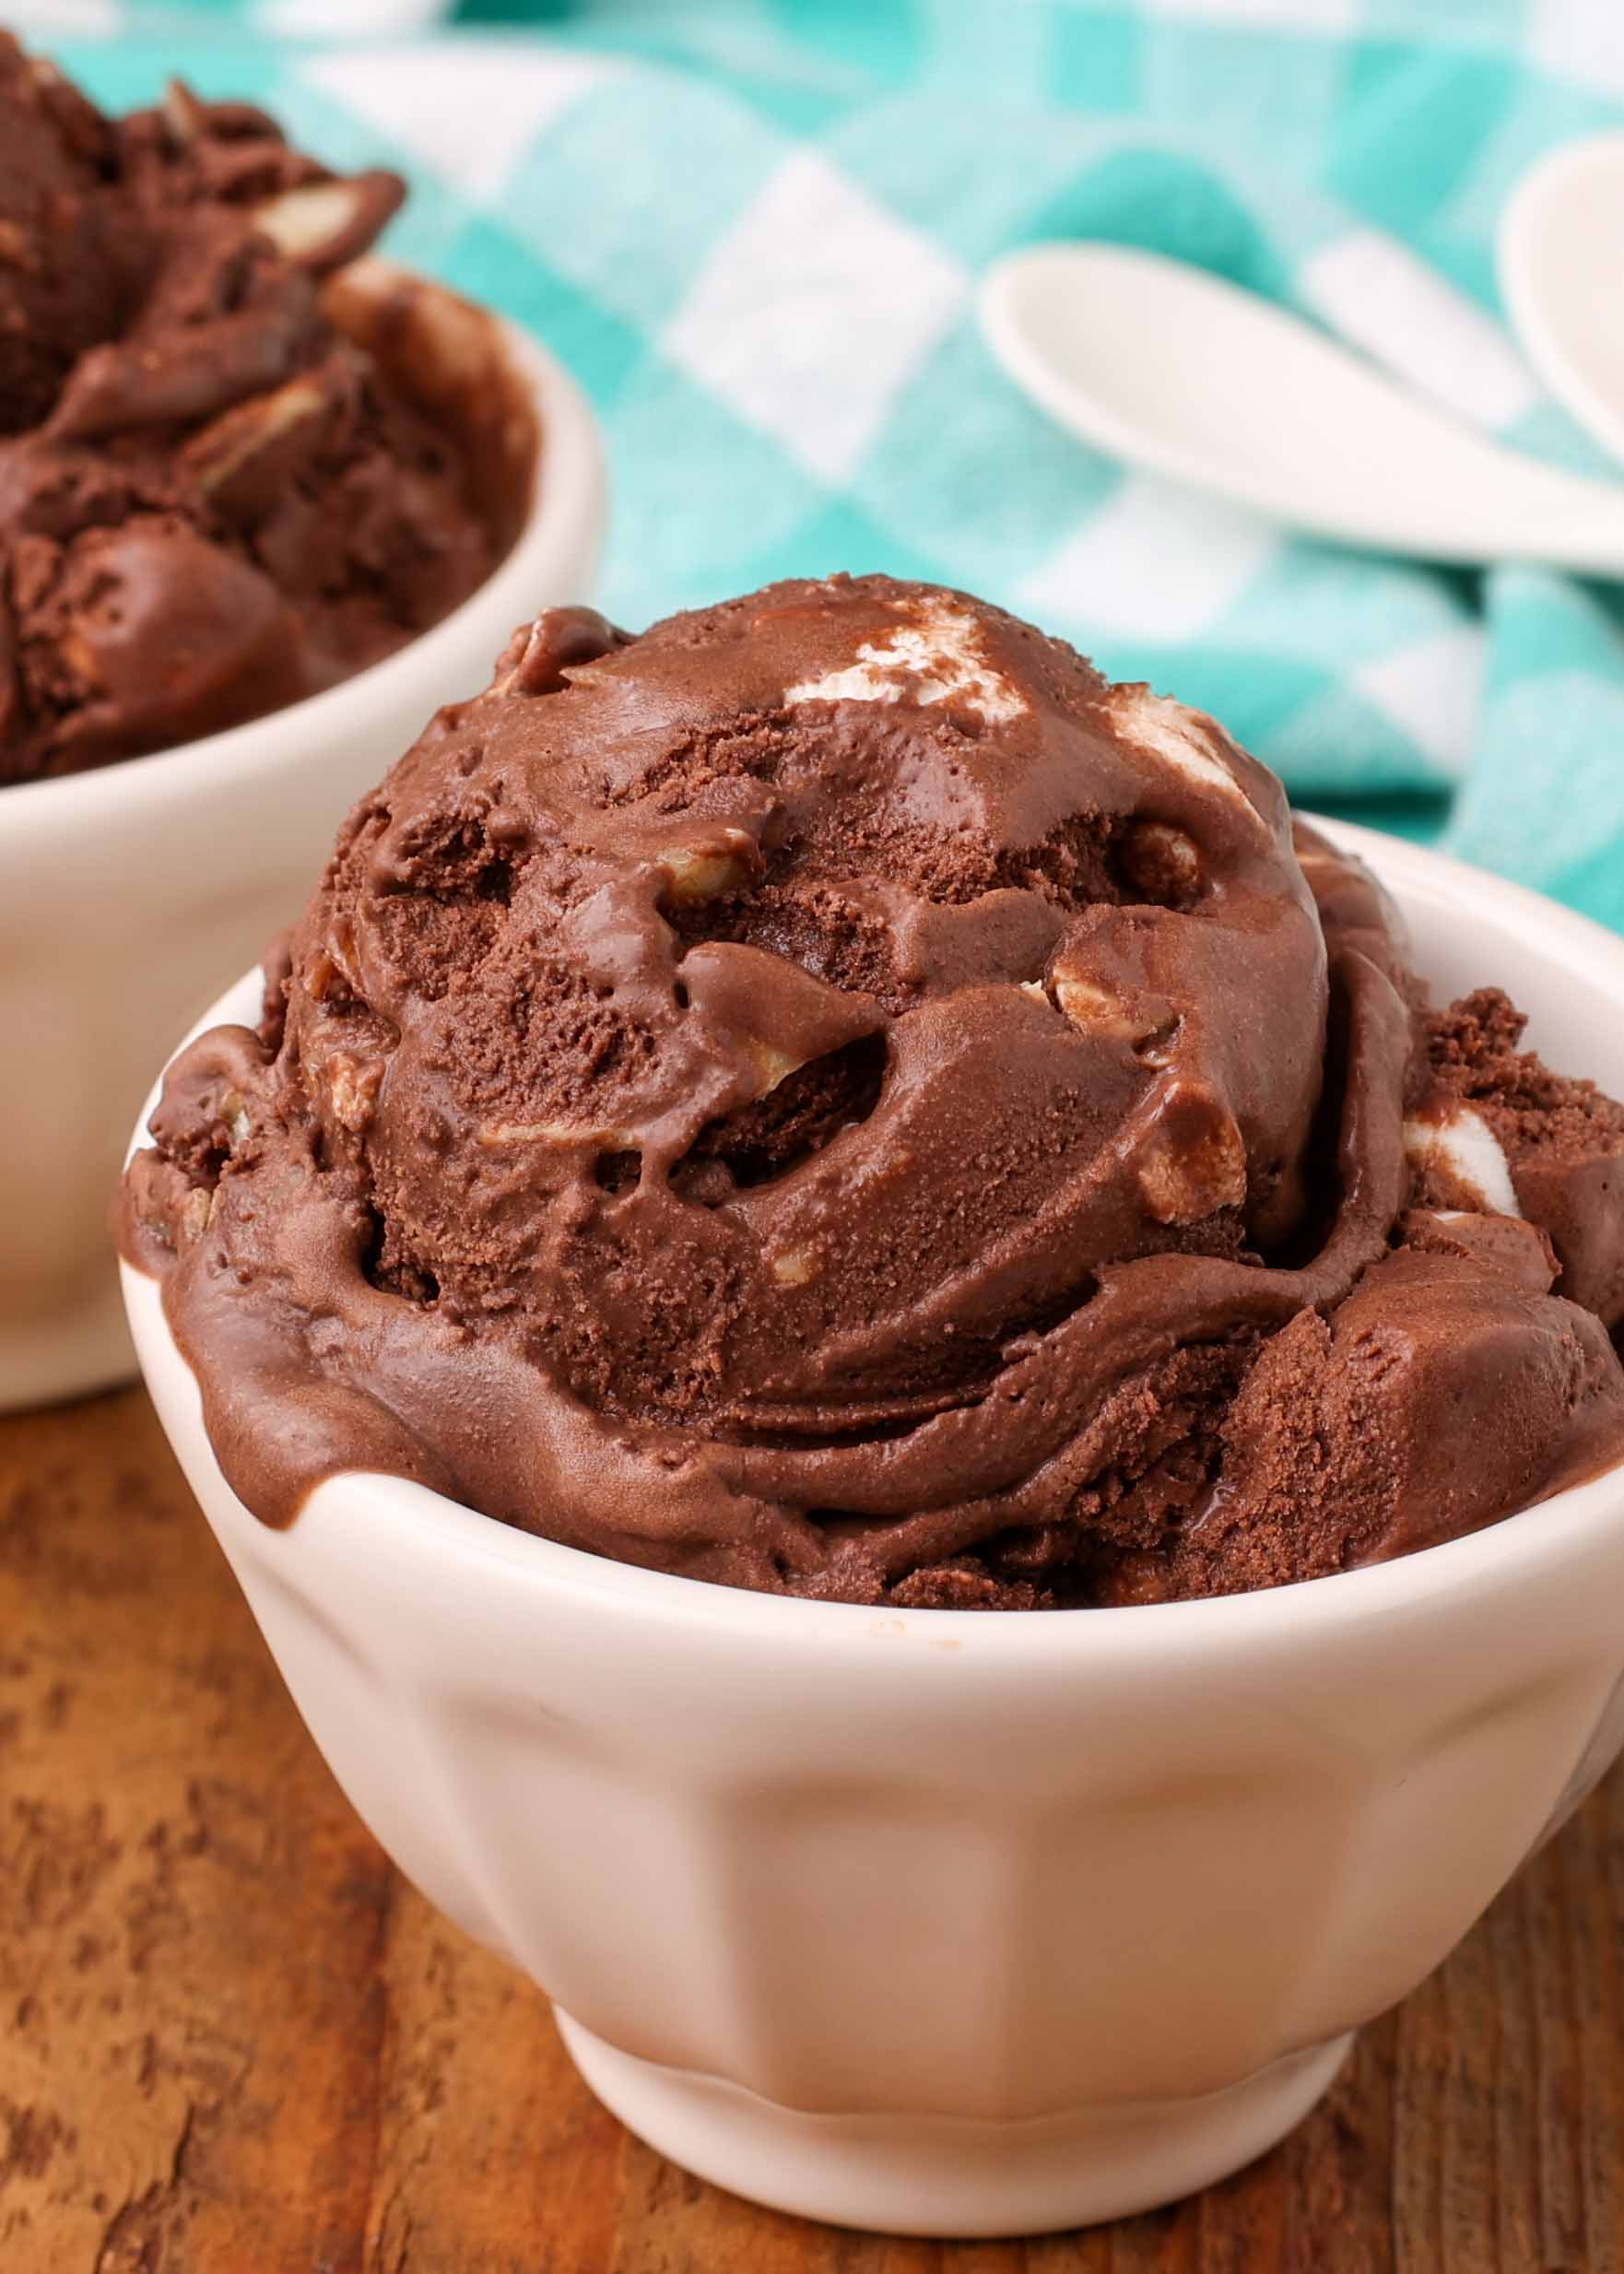 6 reasons why you should own an ice cream maker - Dream Scoops